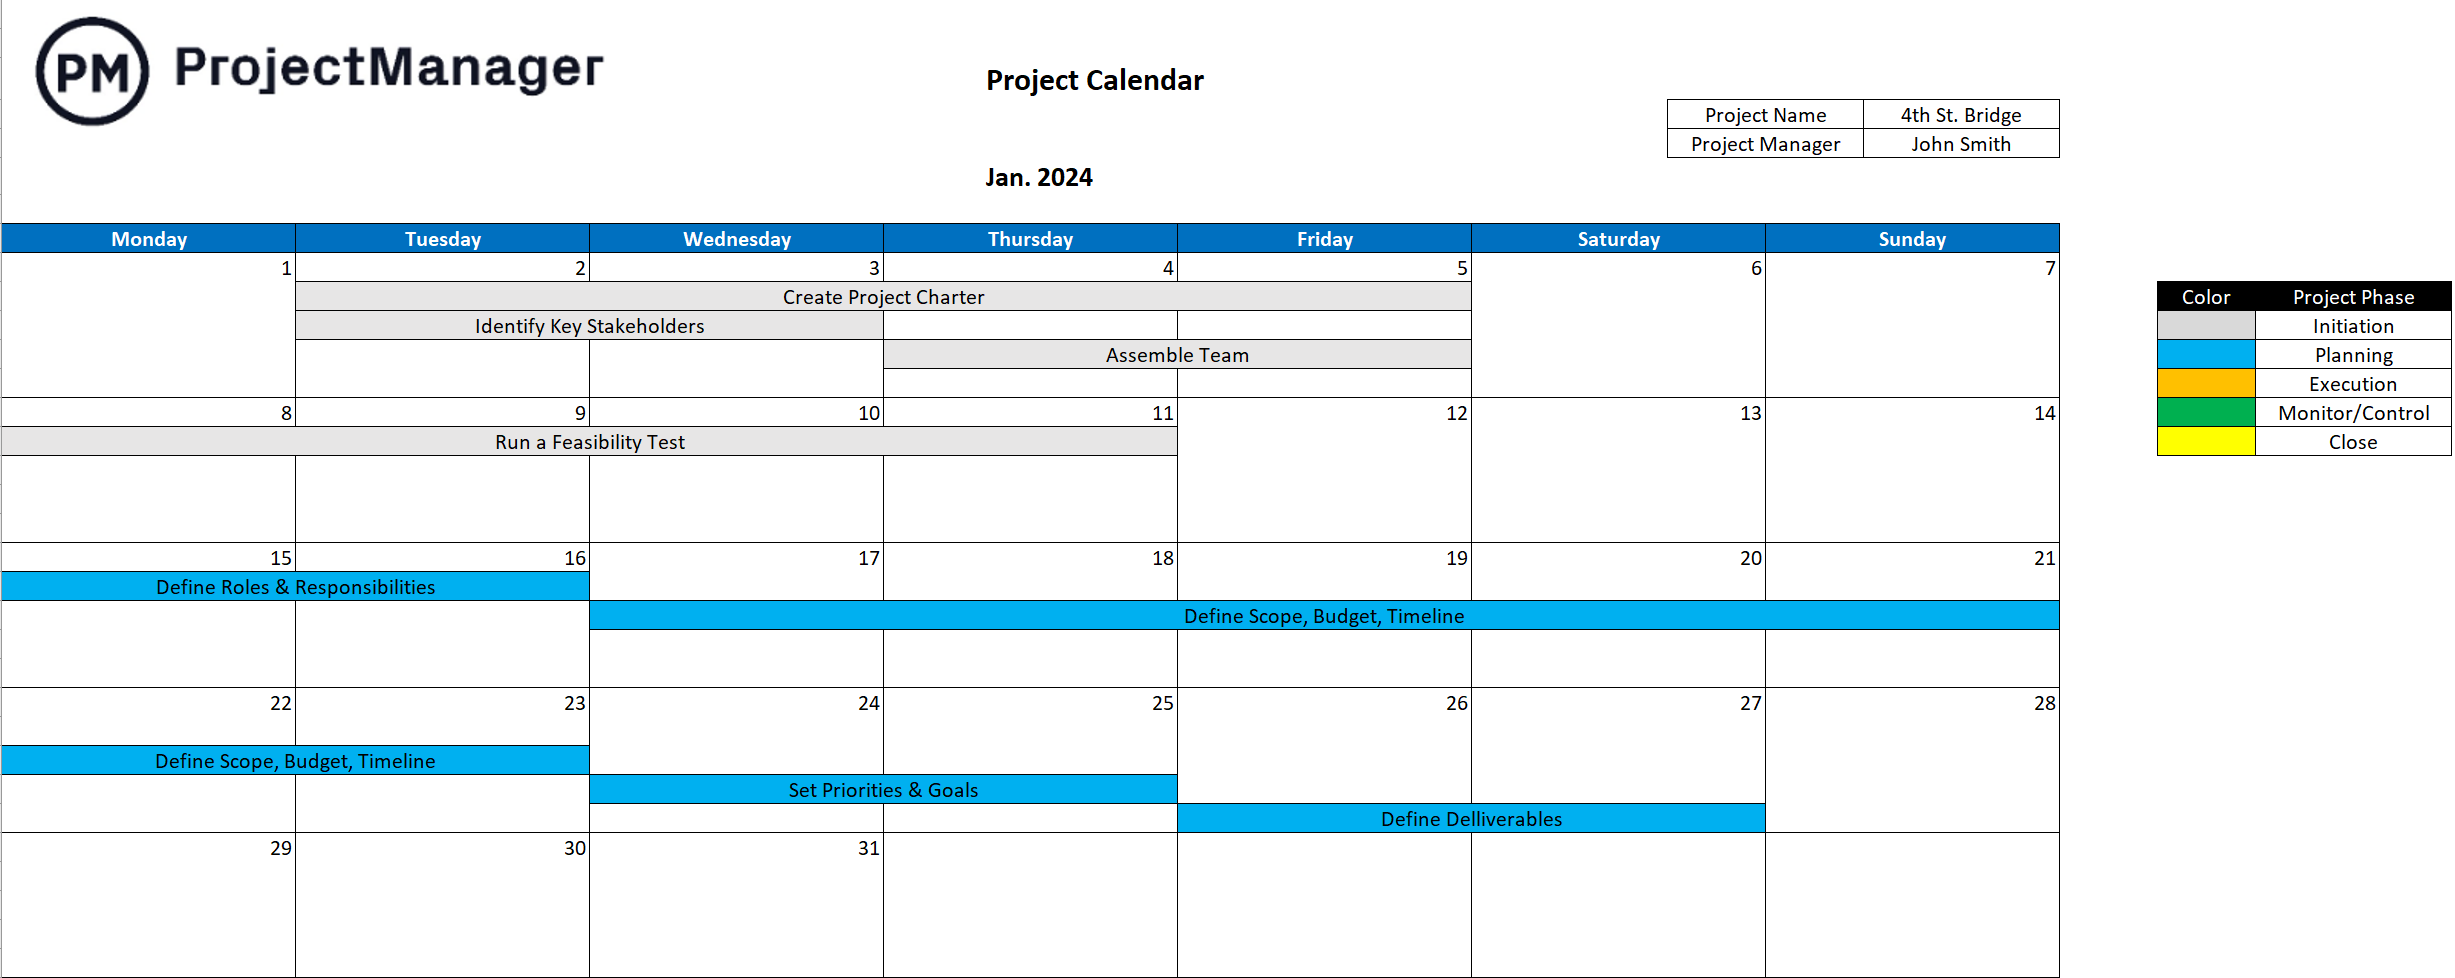 Project Calendar Template for Excel (Free Download)